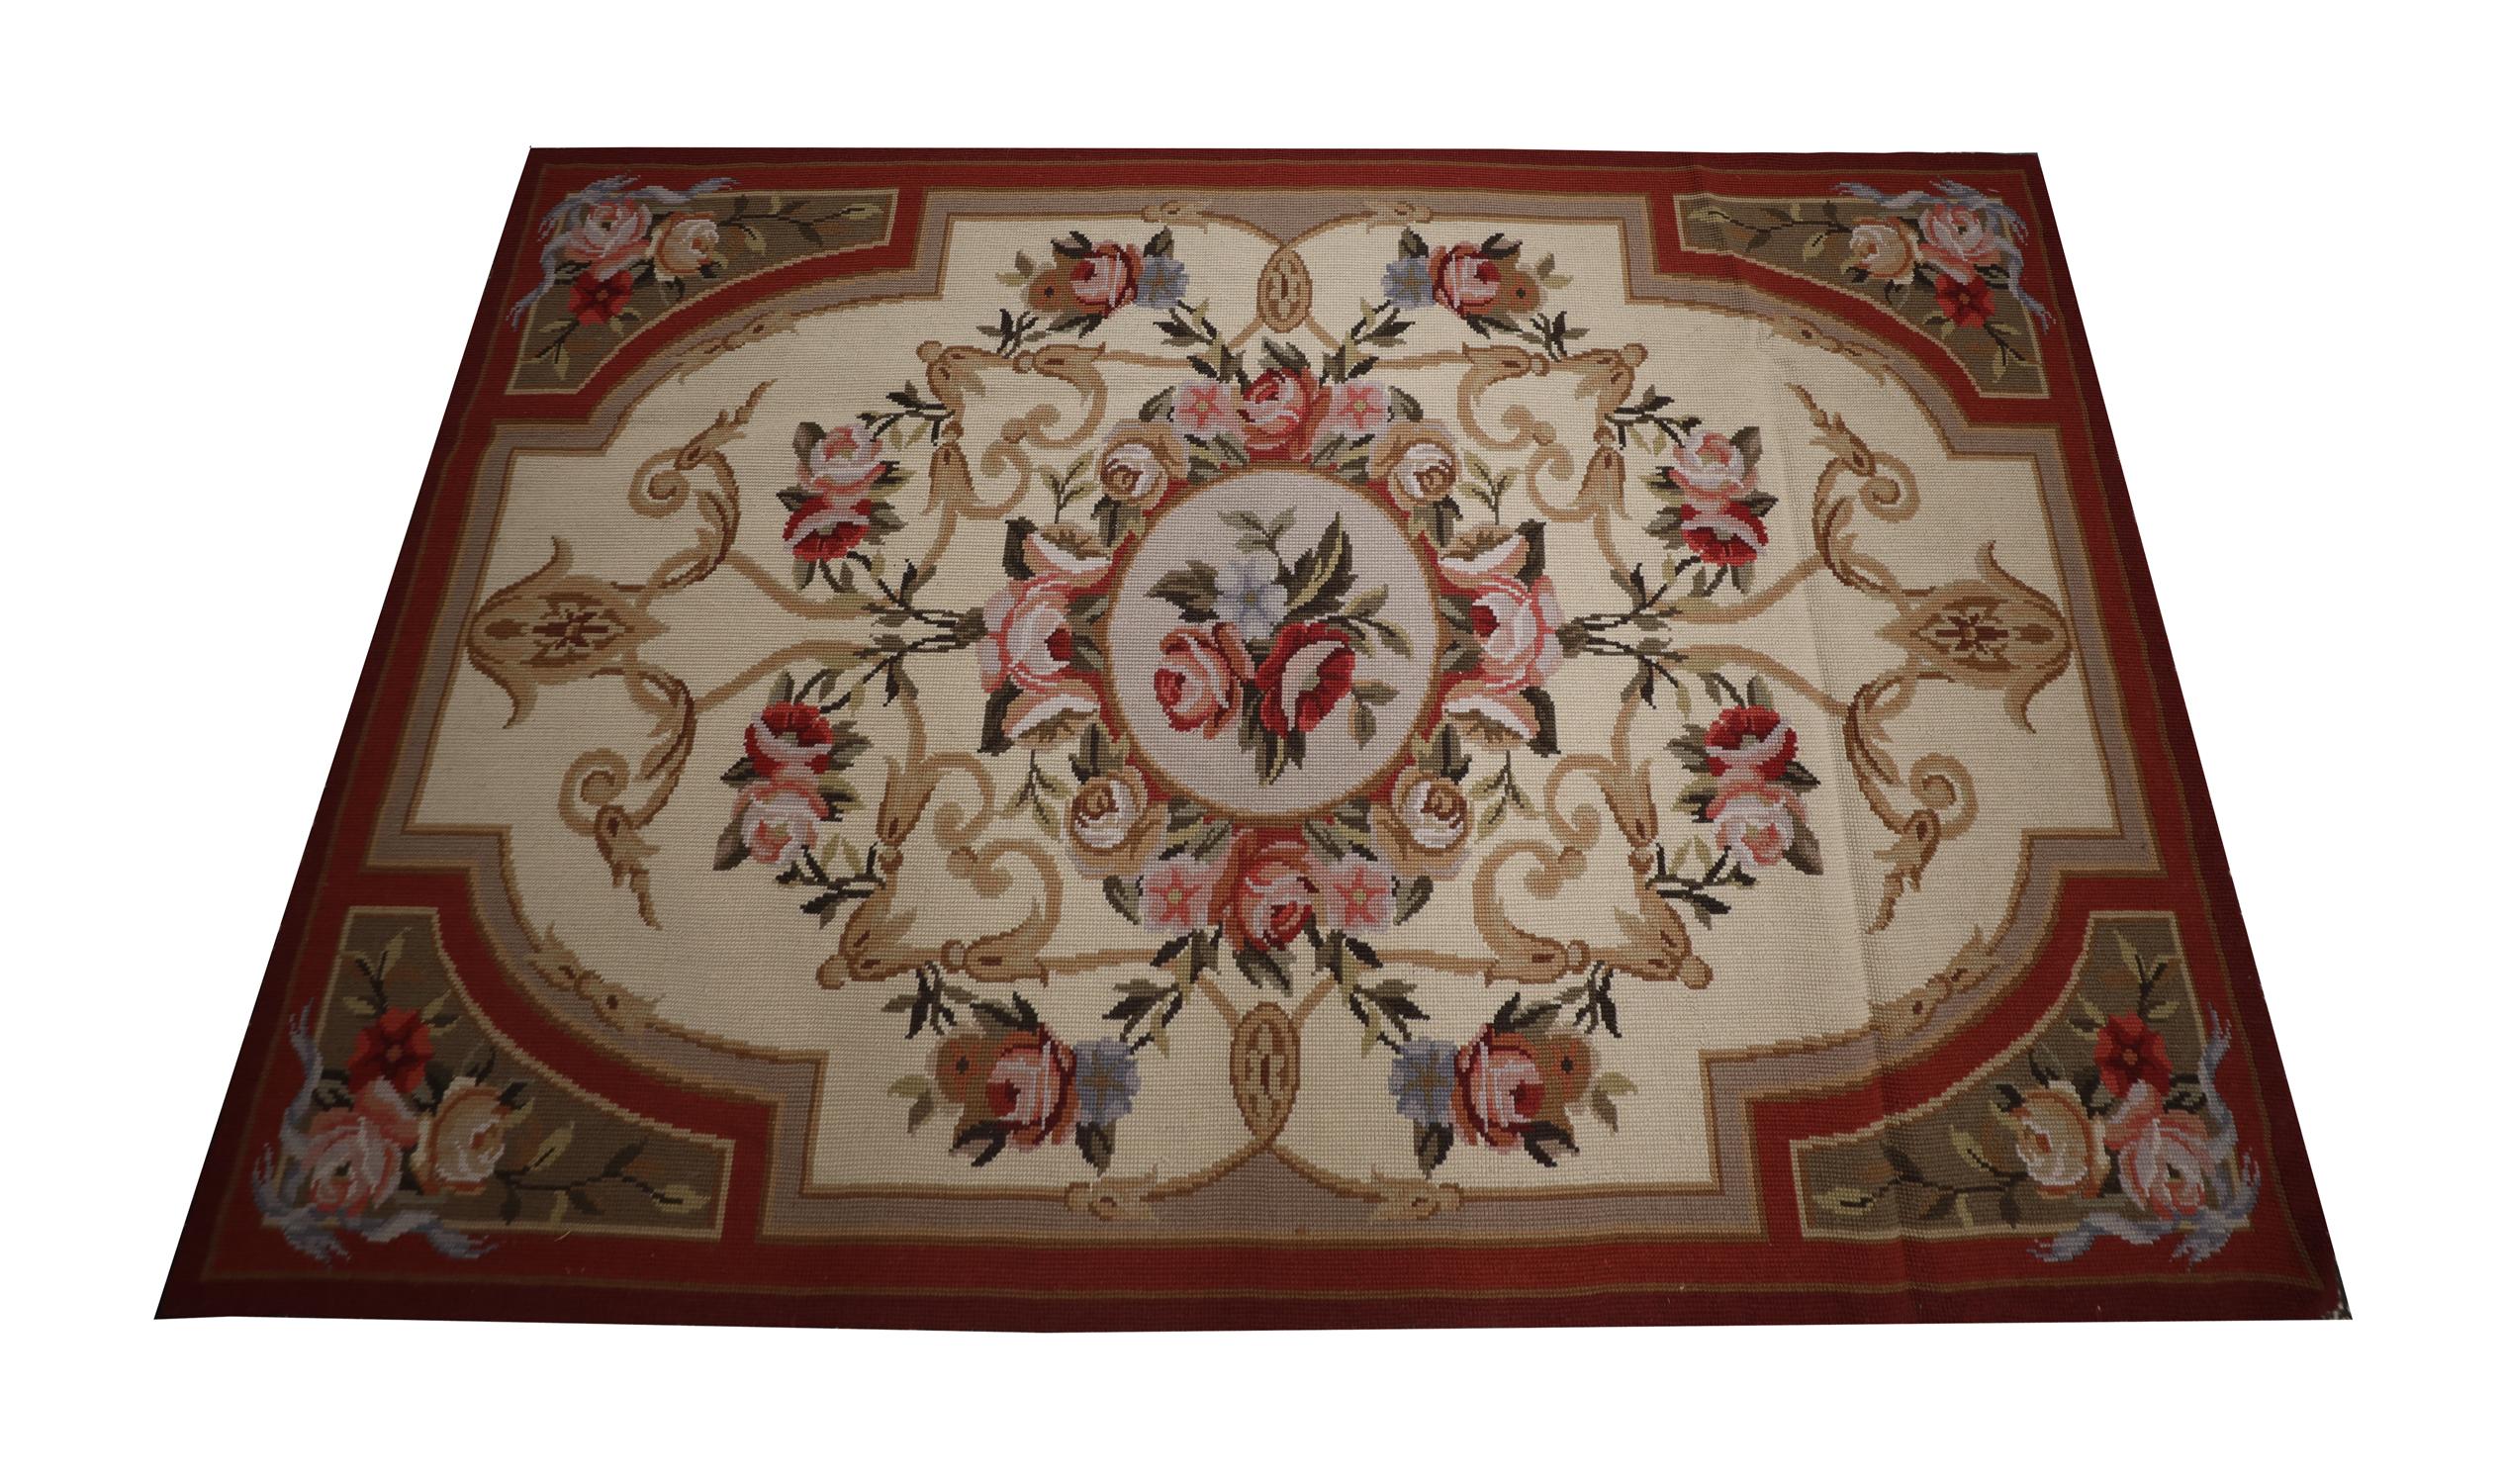 On the lookout for a new carpet to enhance your living room or bedroom? This Beautiful needlepoint could make the perfect accessory. This wool needlepoint is a traditional textile woven by hand. The central design has been woven on a simple cream